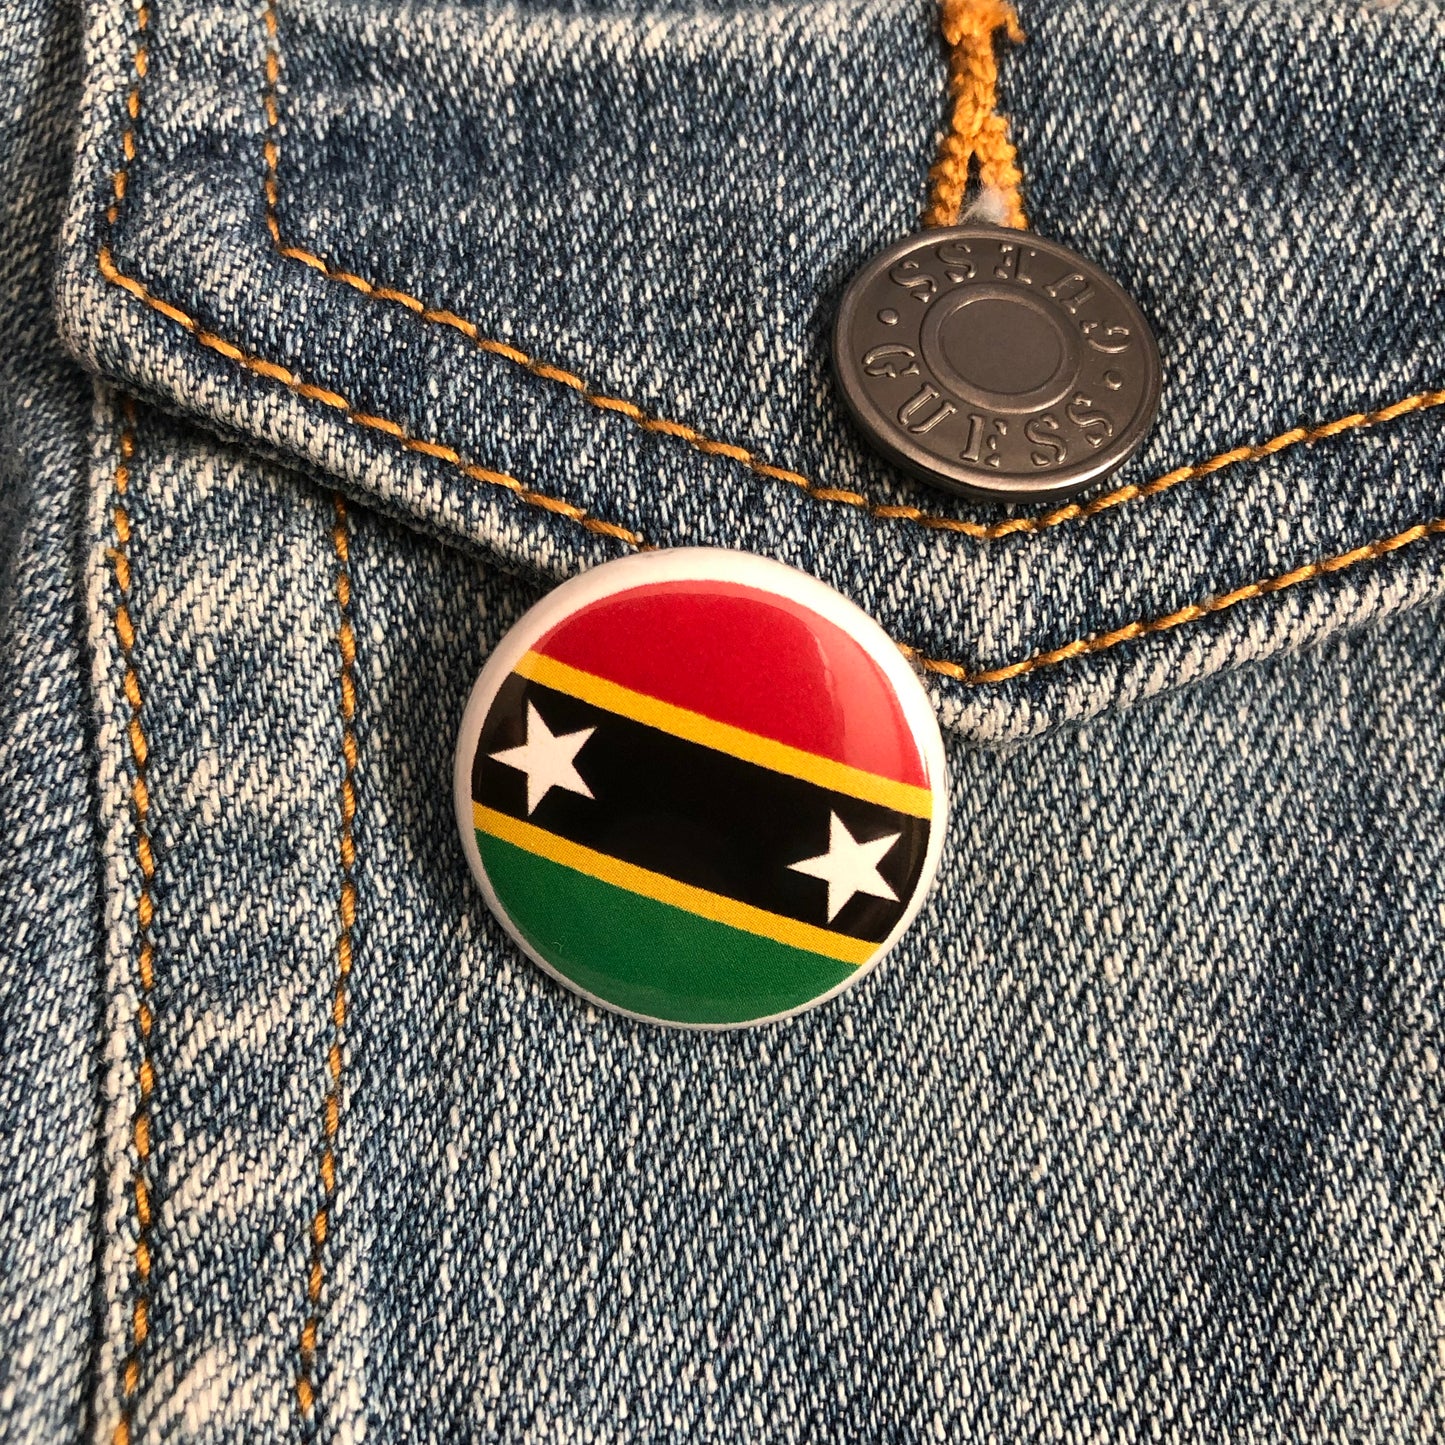 Caribbean Islands West Indies Flags Pin Buttons